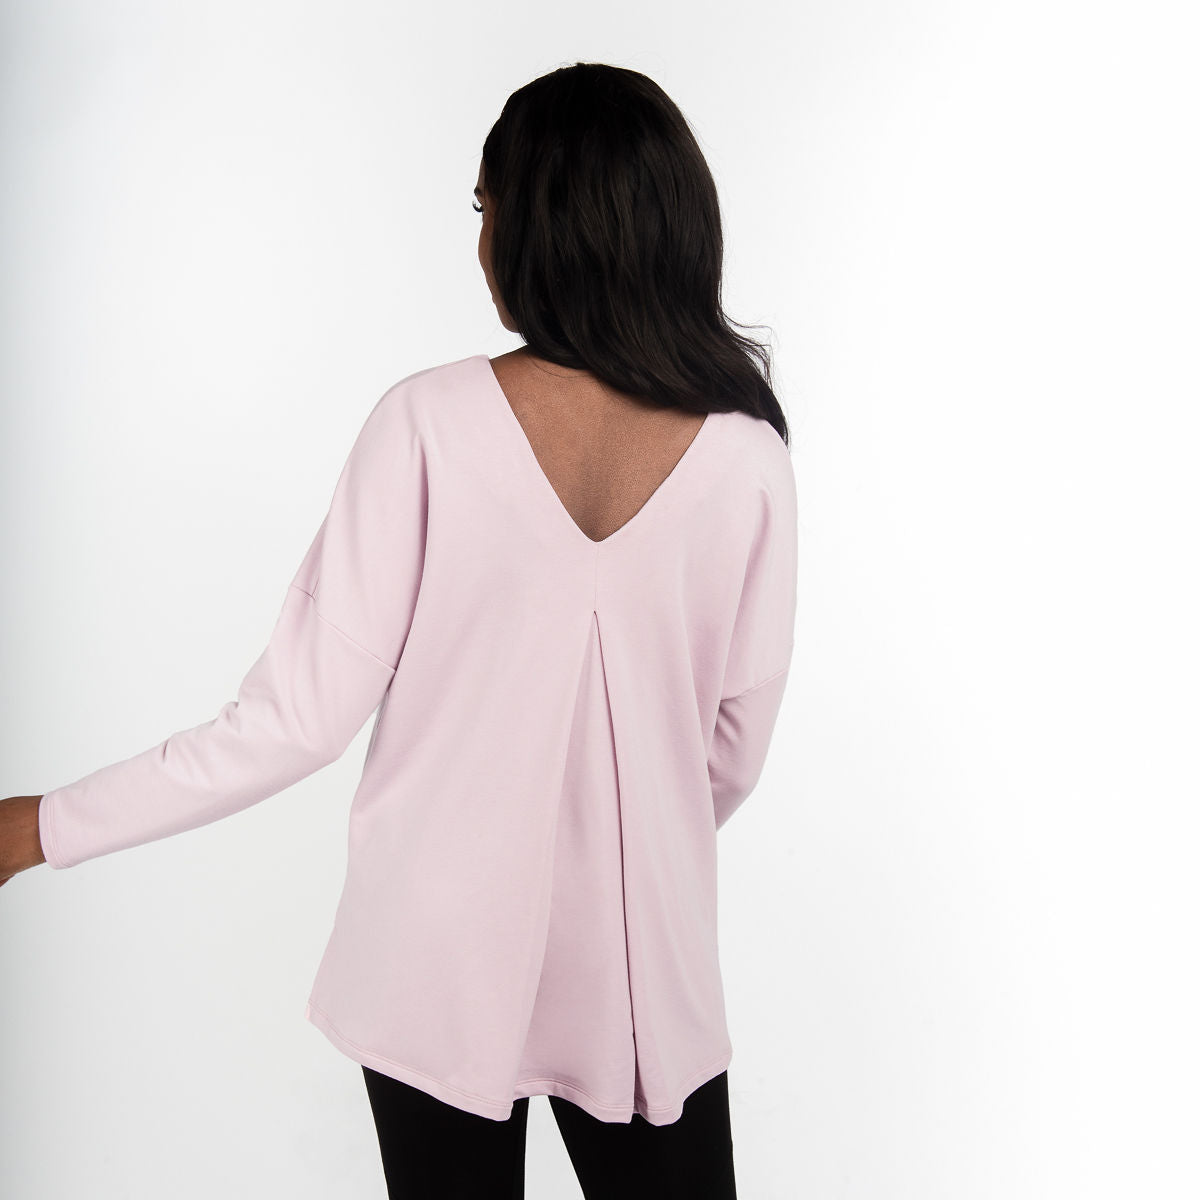 Woman wearing light pink long sleeve shirt with a relaxed fit, front scoop neckline or v-neckline back with pleating and side slits paired with black fitted leggings